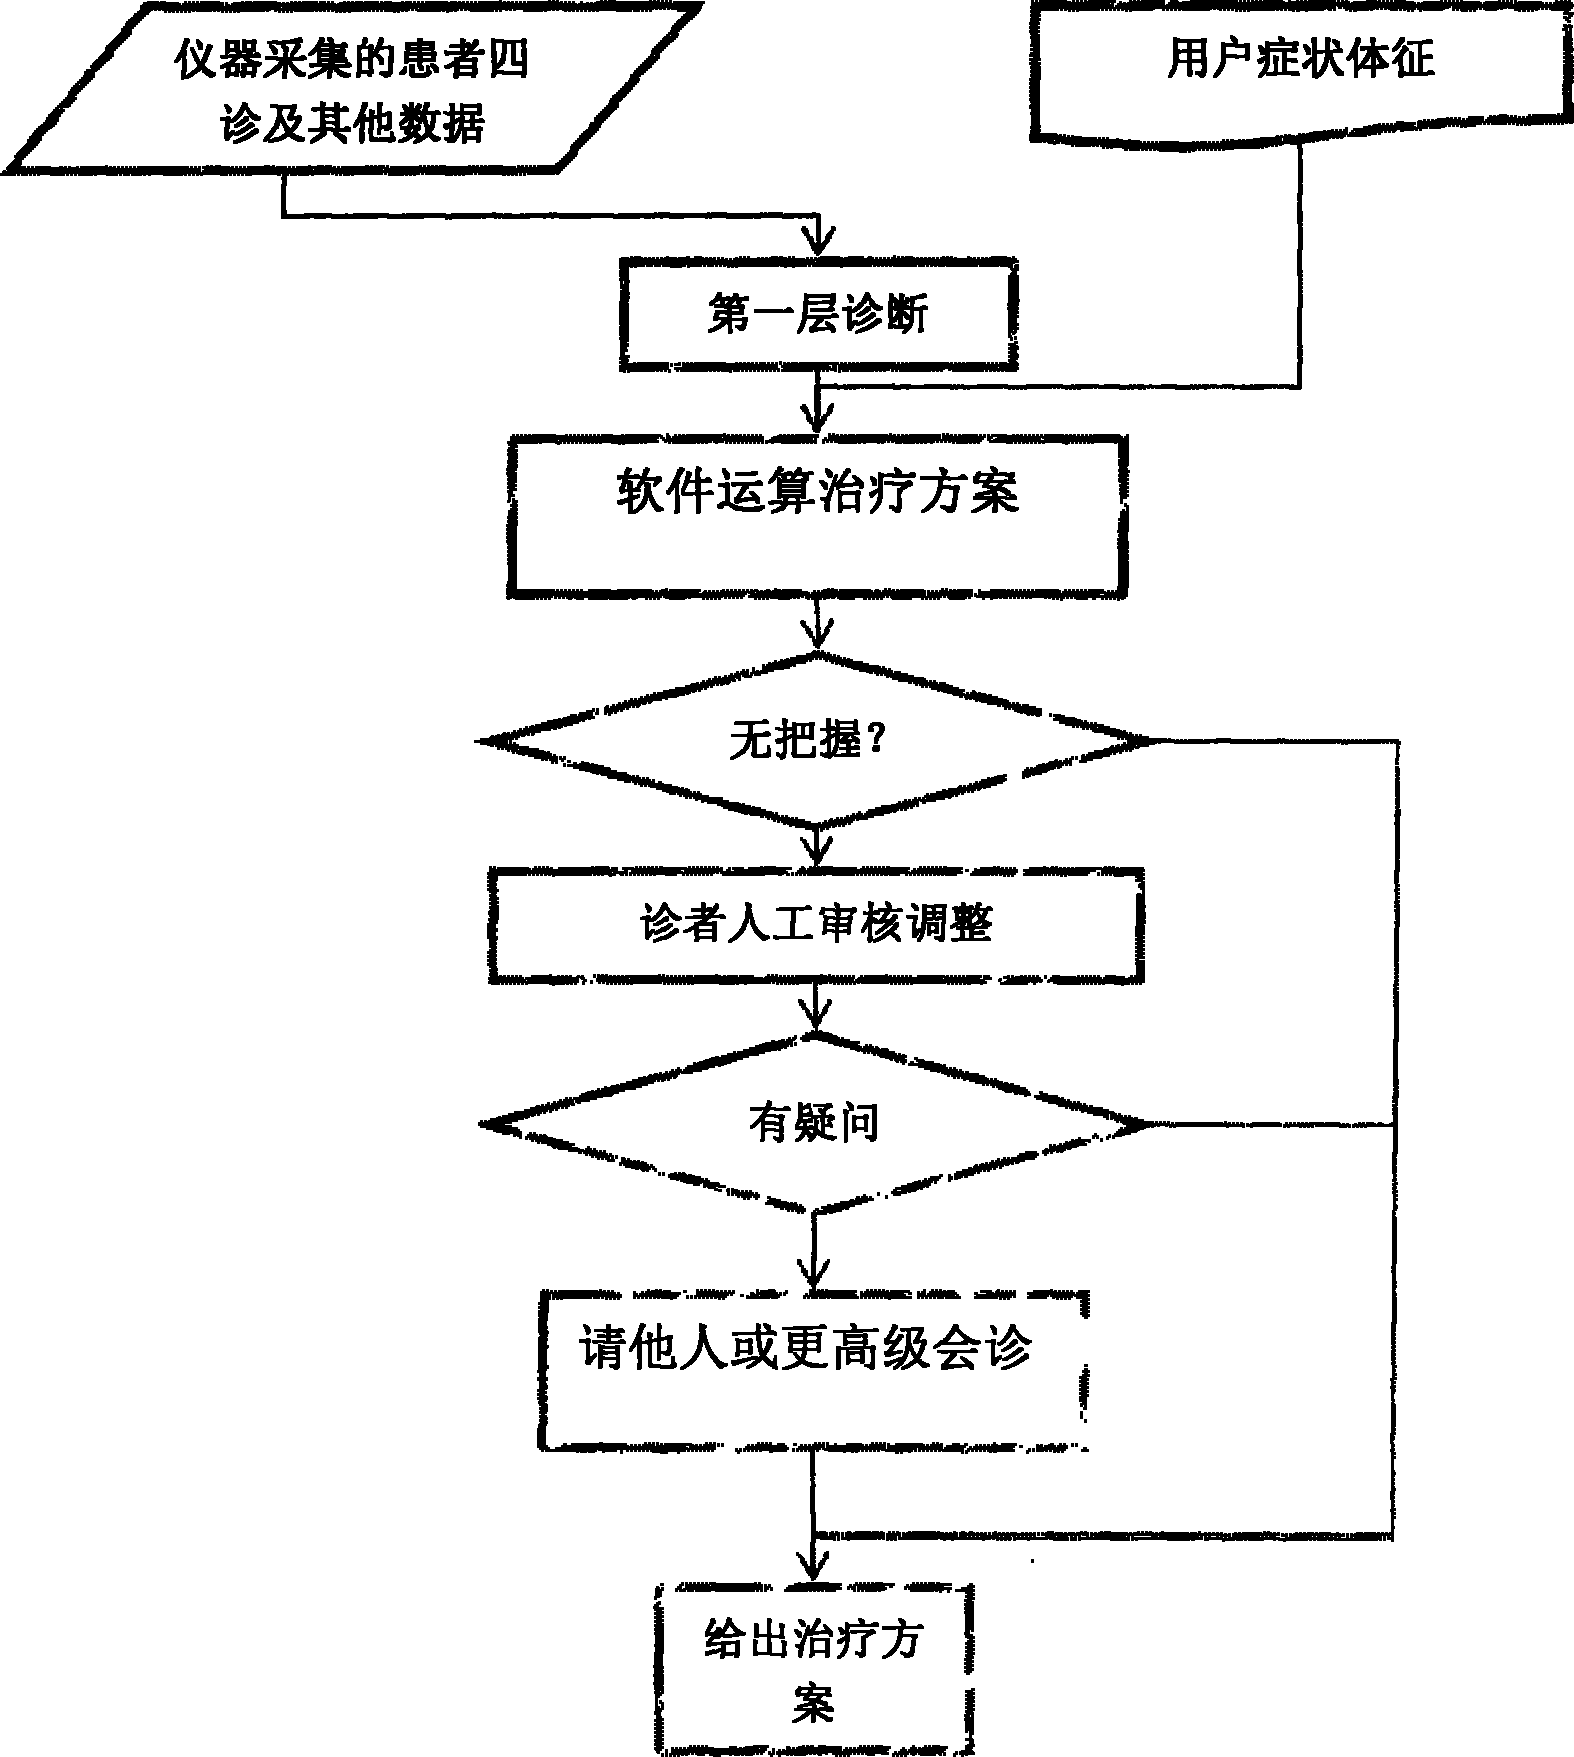 Novel TCM (traditional Chinese medicine) diagnosis process and device